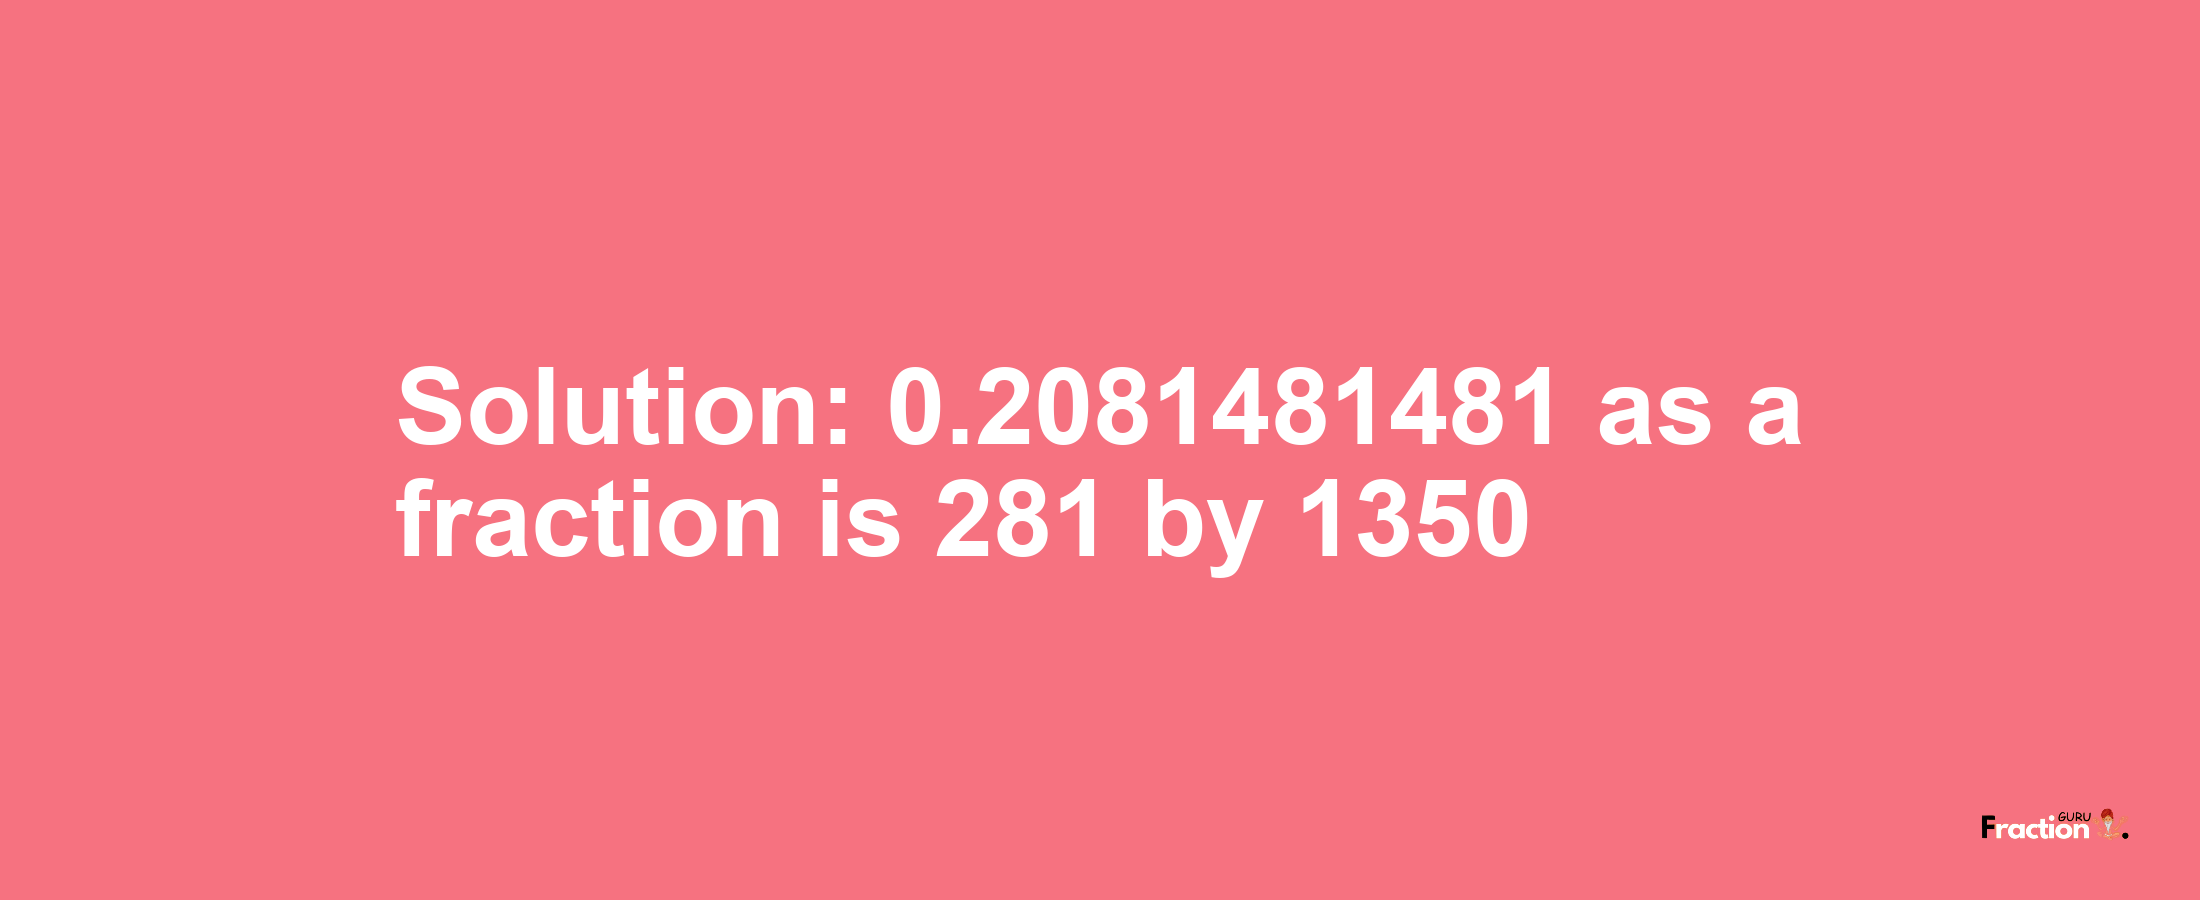 Solution:0.2081481481 as a fraction is 281/1350